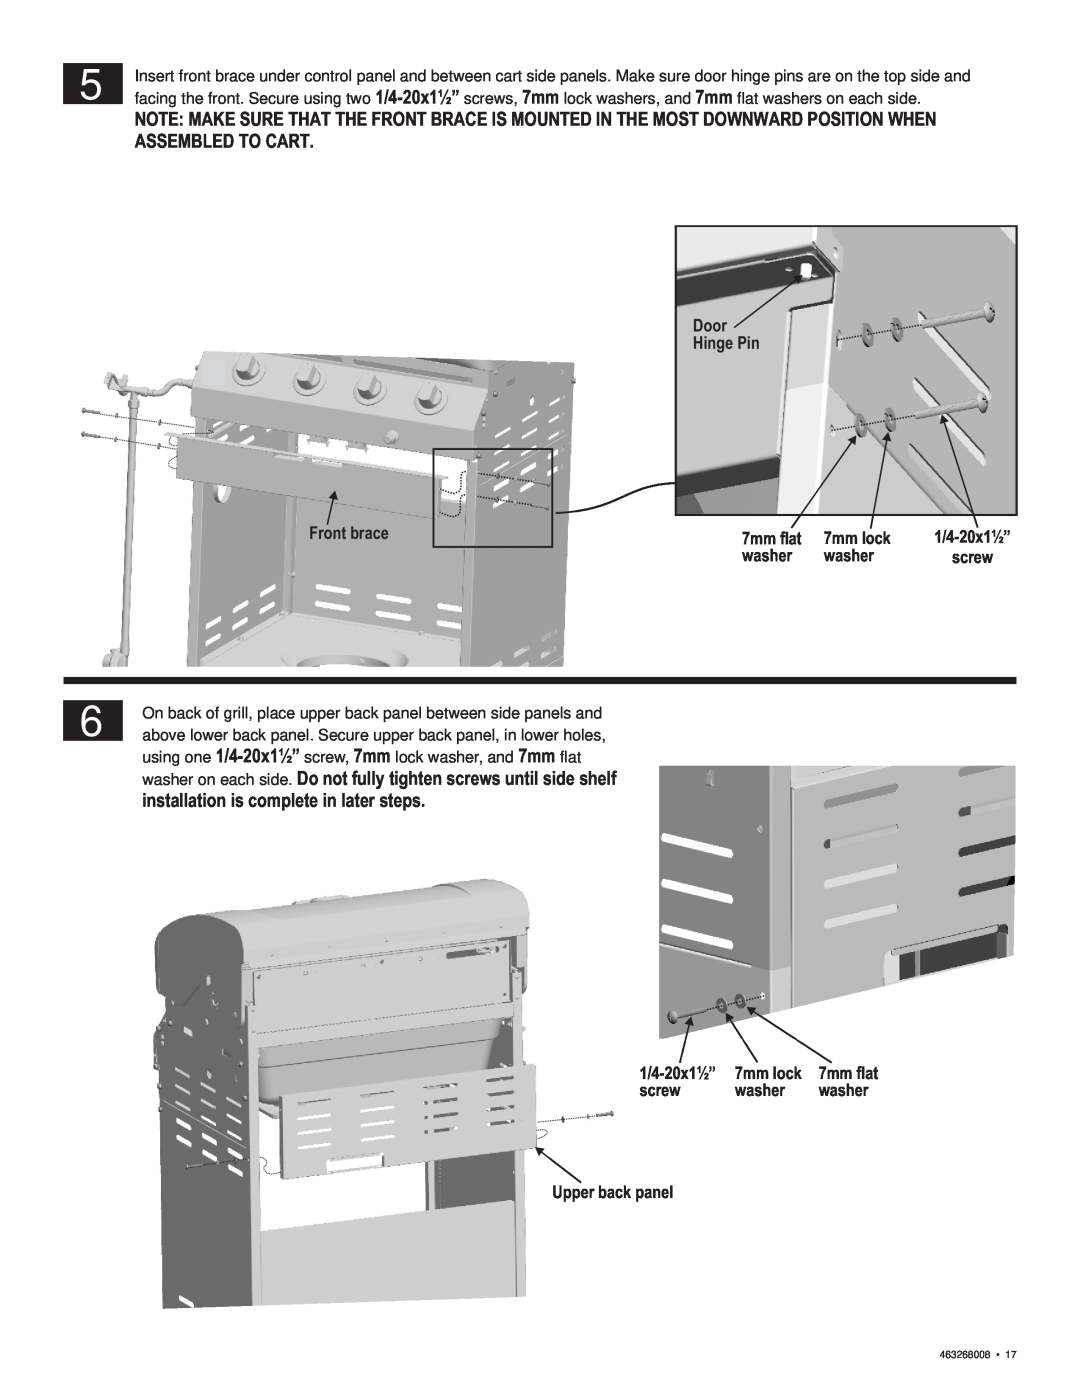 Char-Broil 463268008 Assembled To Cart, installation is complete in later steps, Door Hinge Pin, Front brace, 7mm flat 